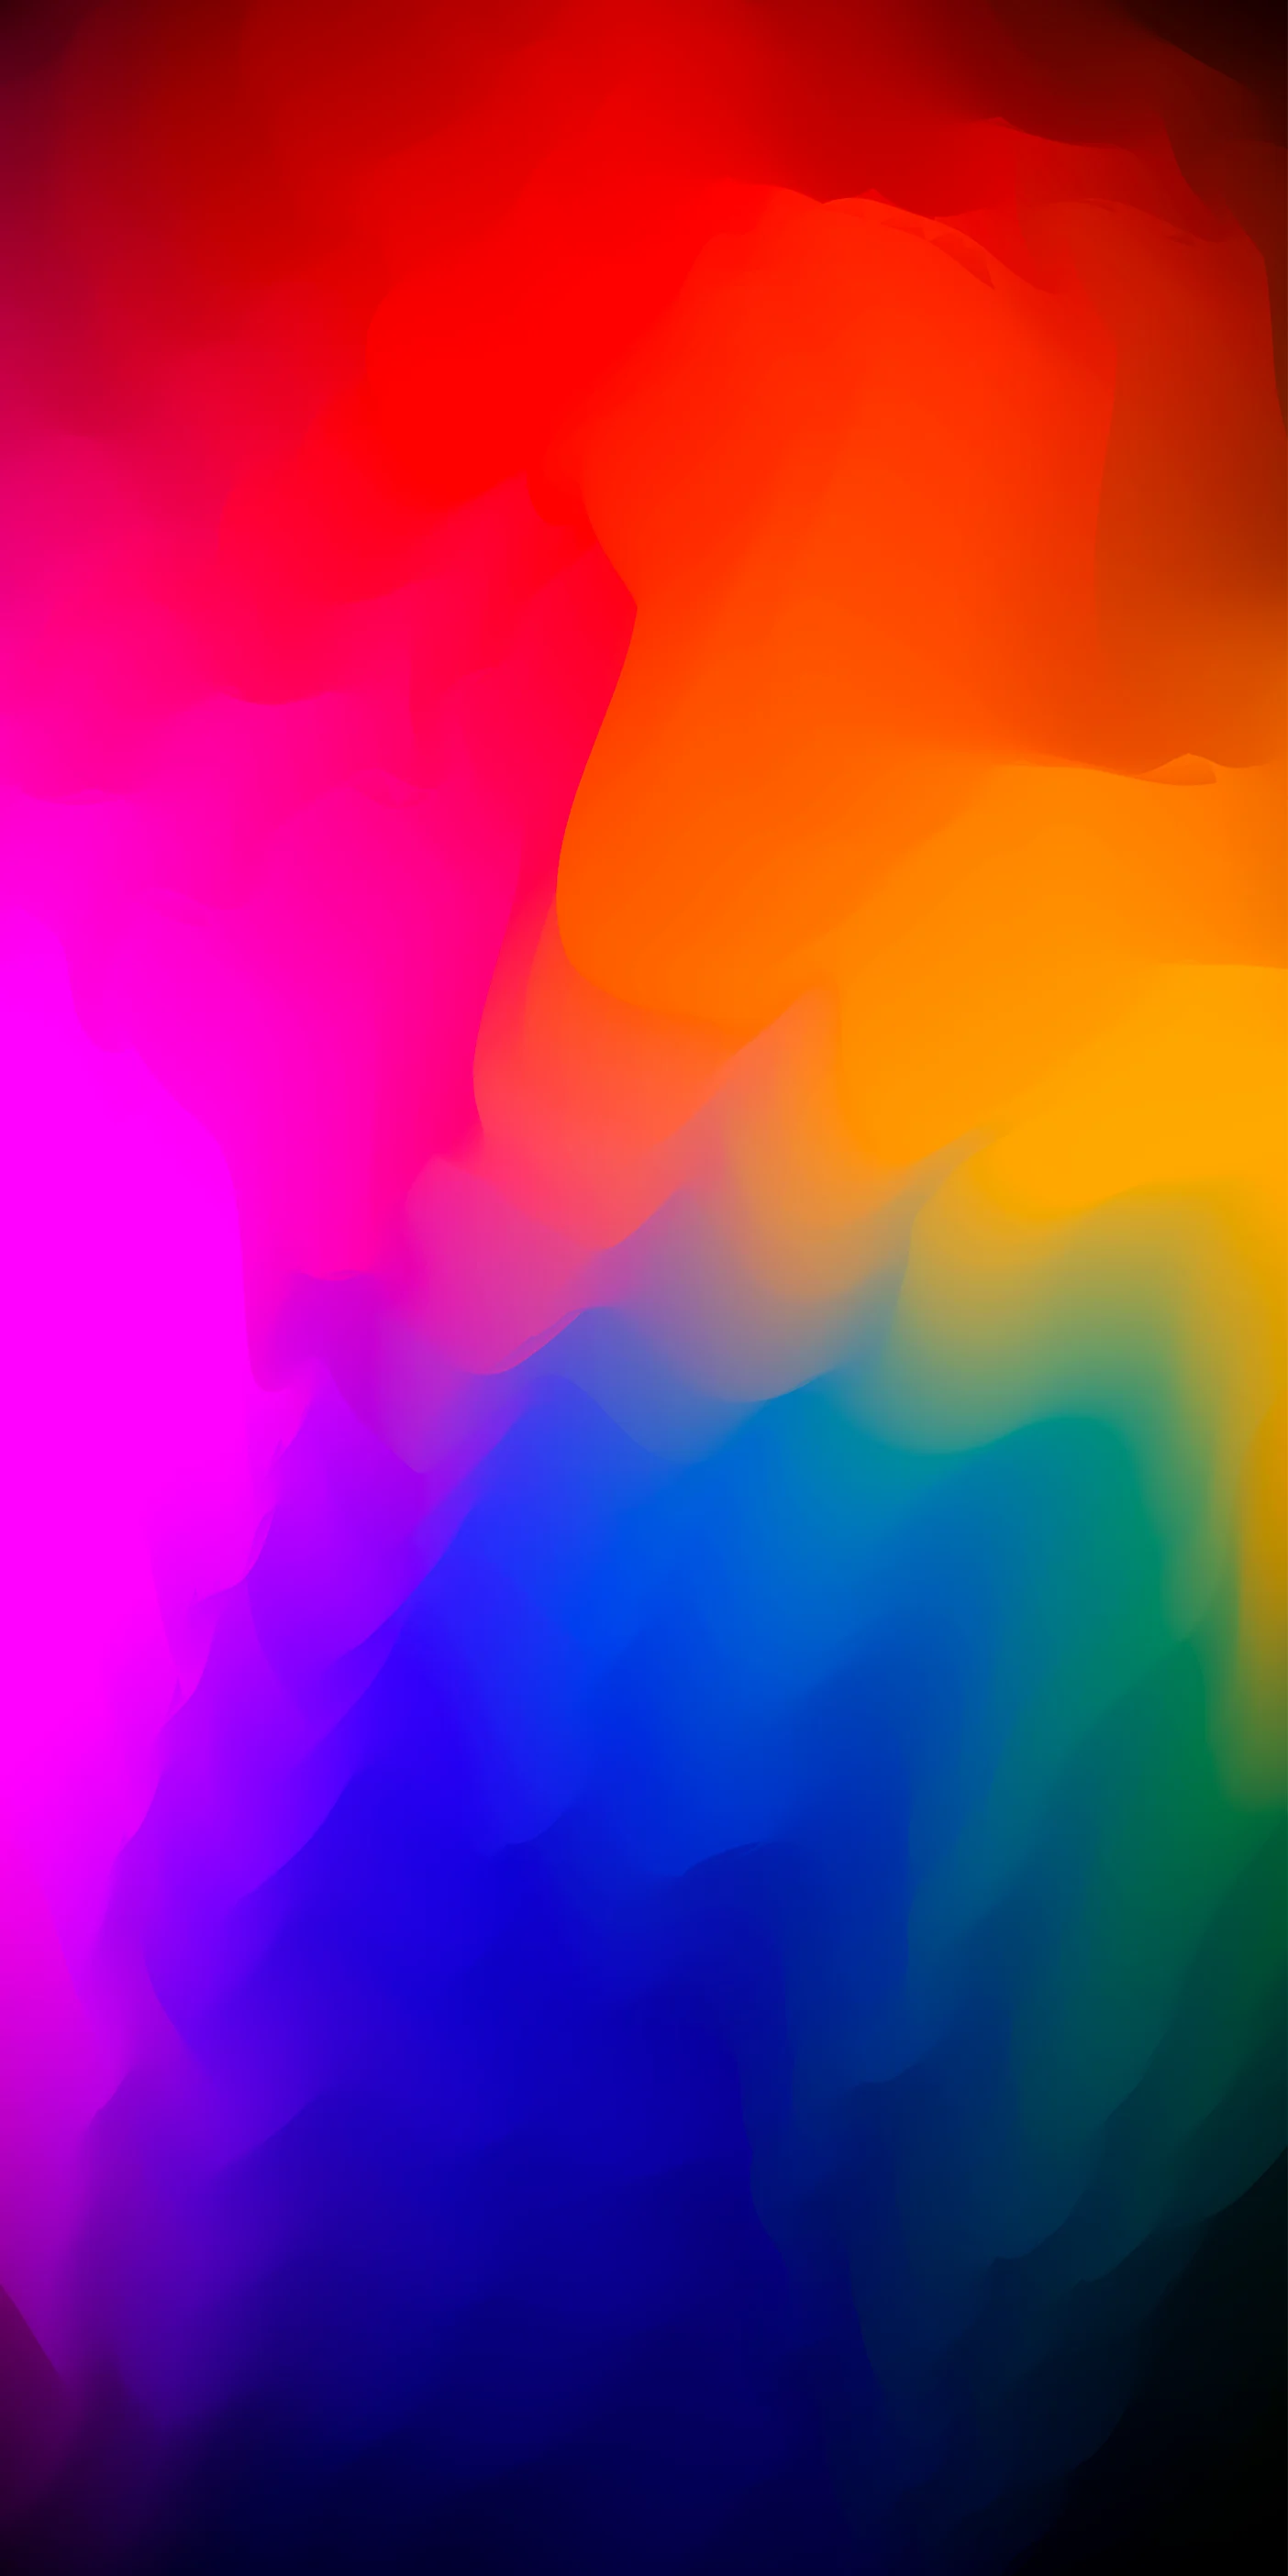 Colorful iPhone wallpaper for free HD - 06